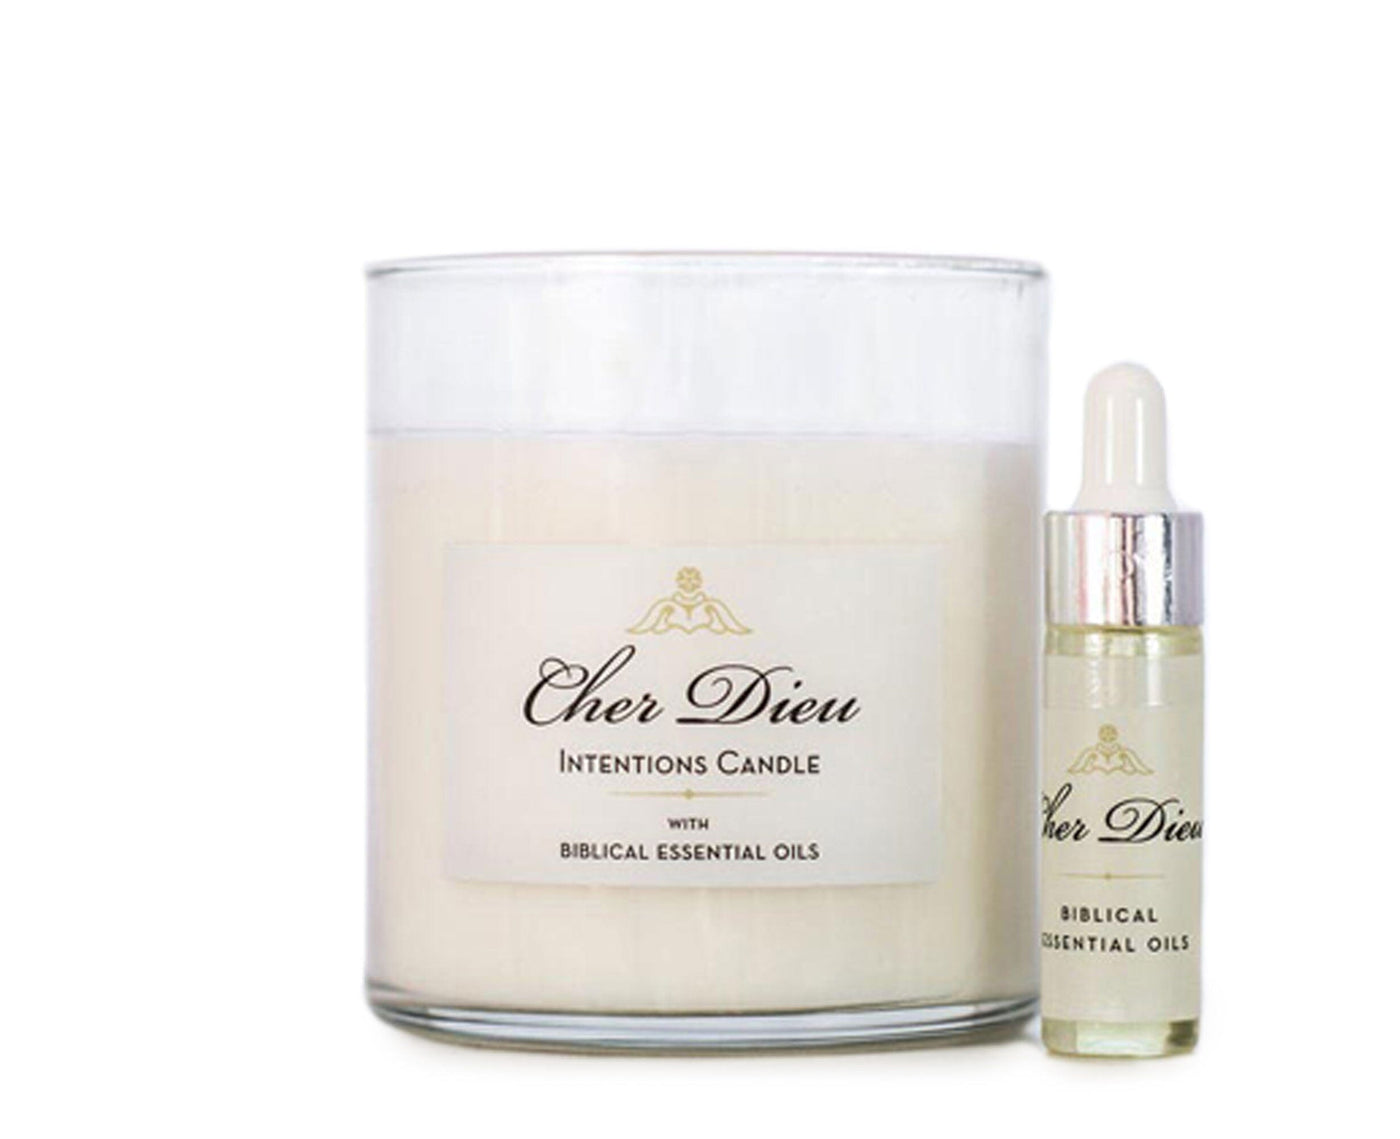 Intentions Classic Candle Kit Candles Cher Dieu White 